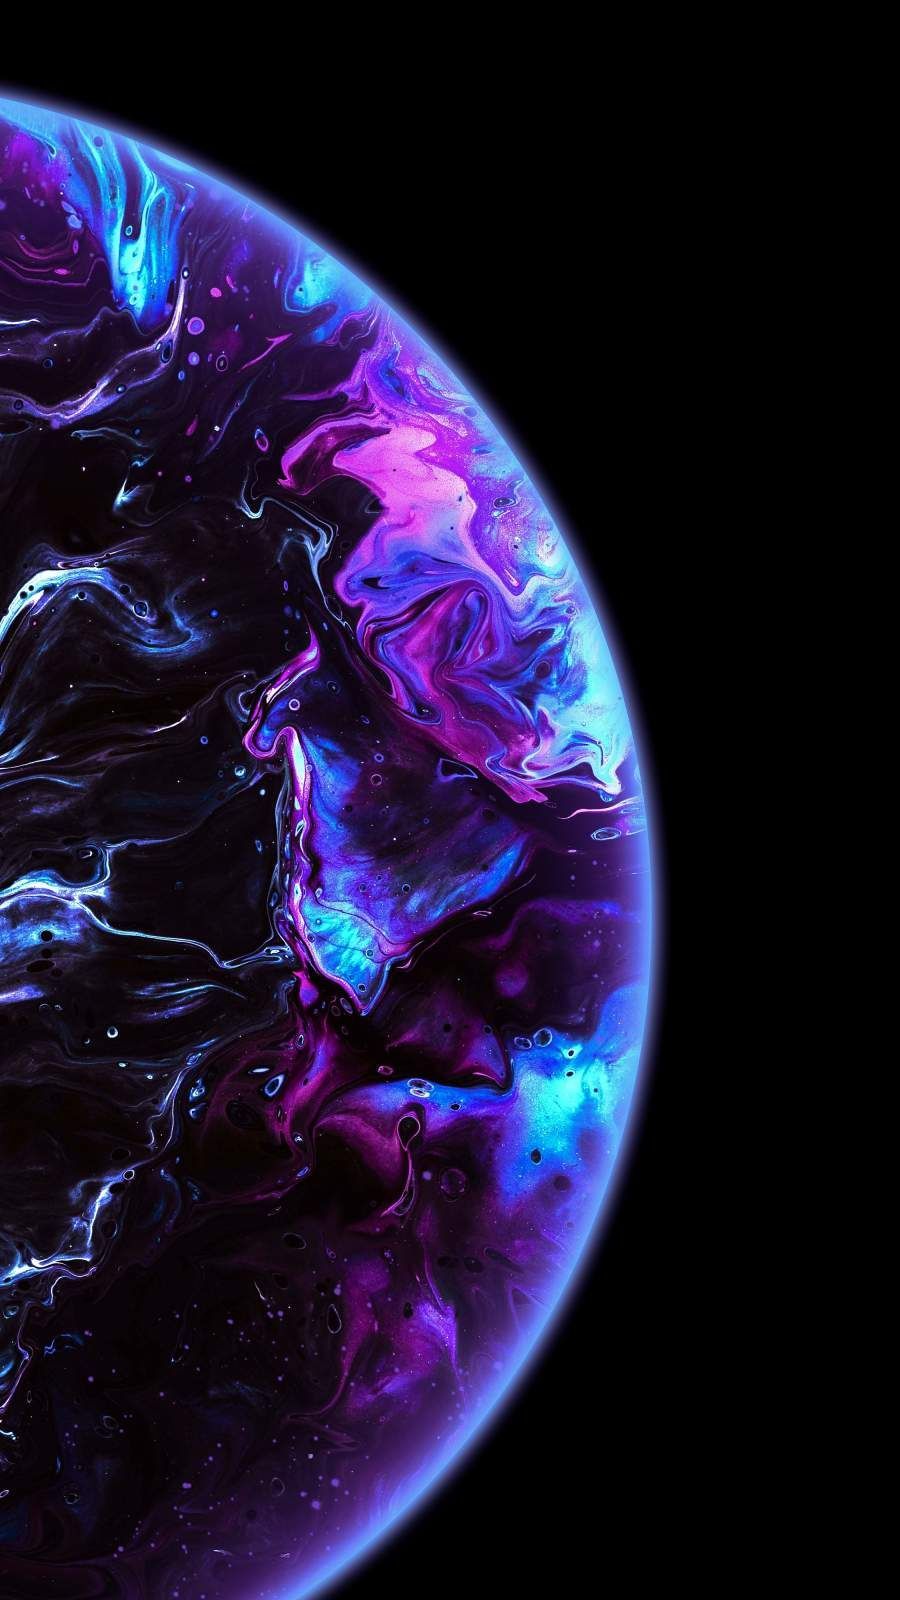 iOS Aesthetic Planets Wallpapers - Wallpaper Cave